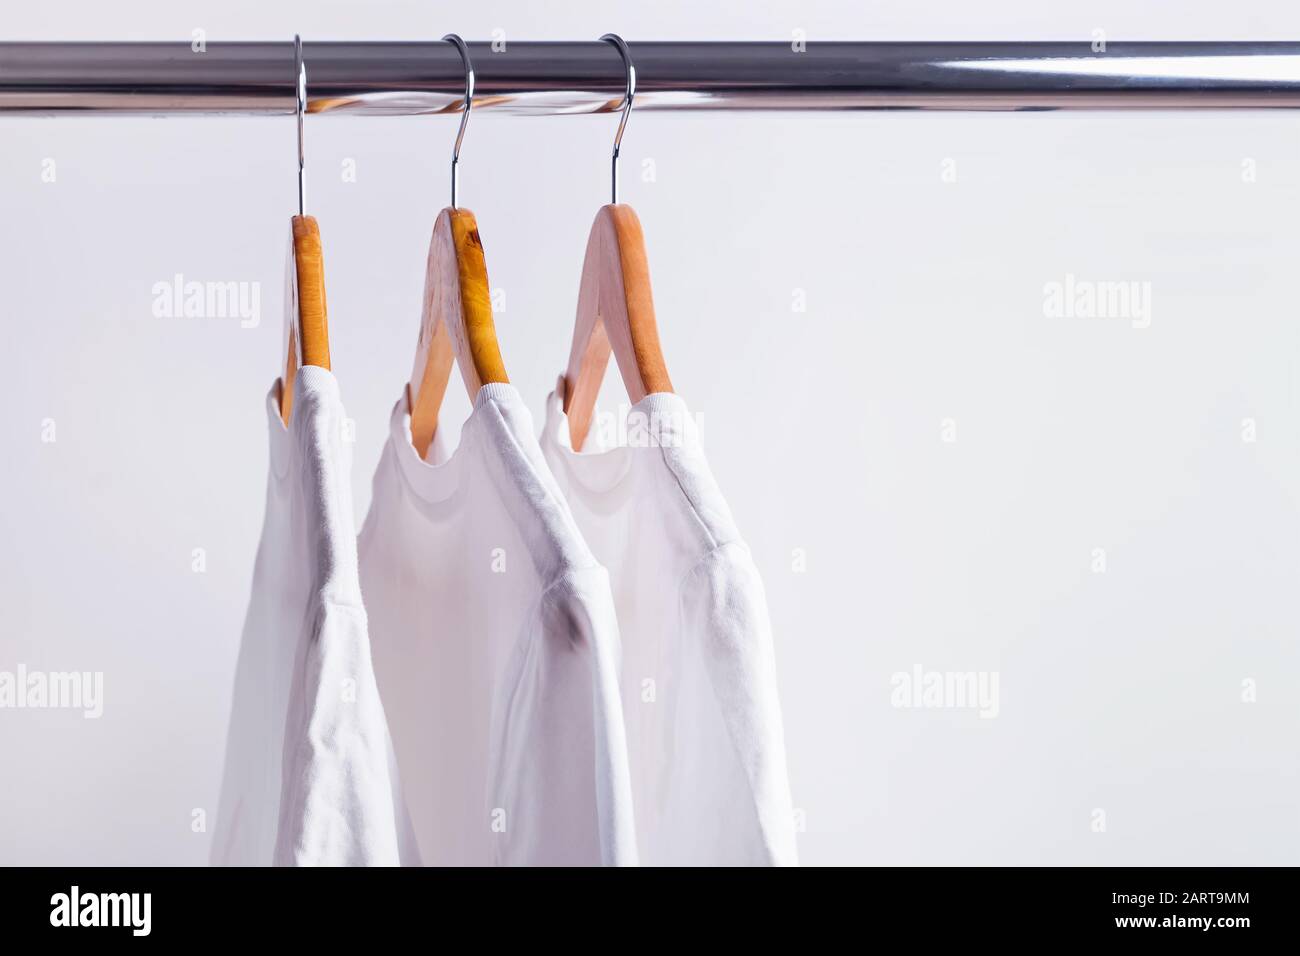 Three wite t-shirts hanging on wooden hangers Stock Photo